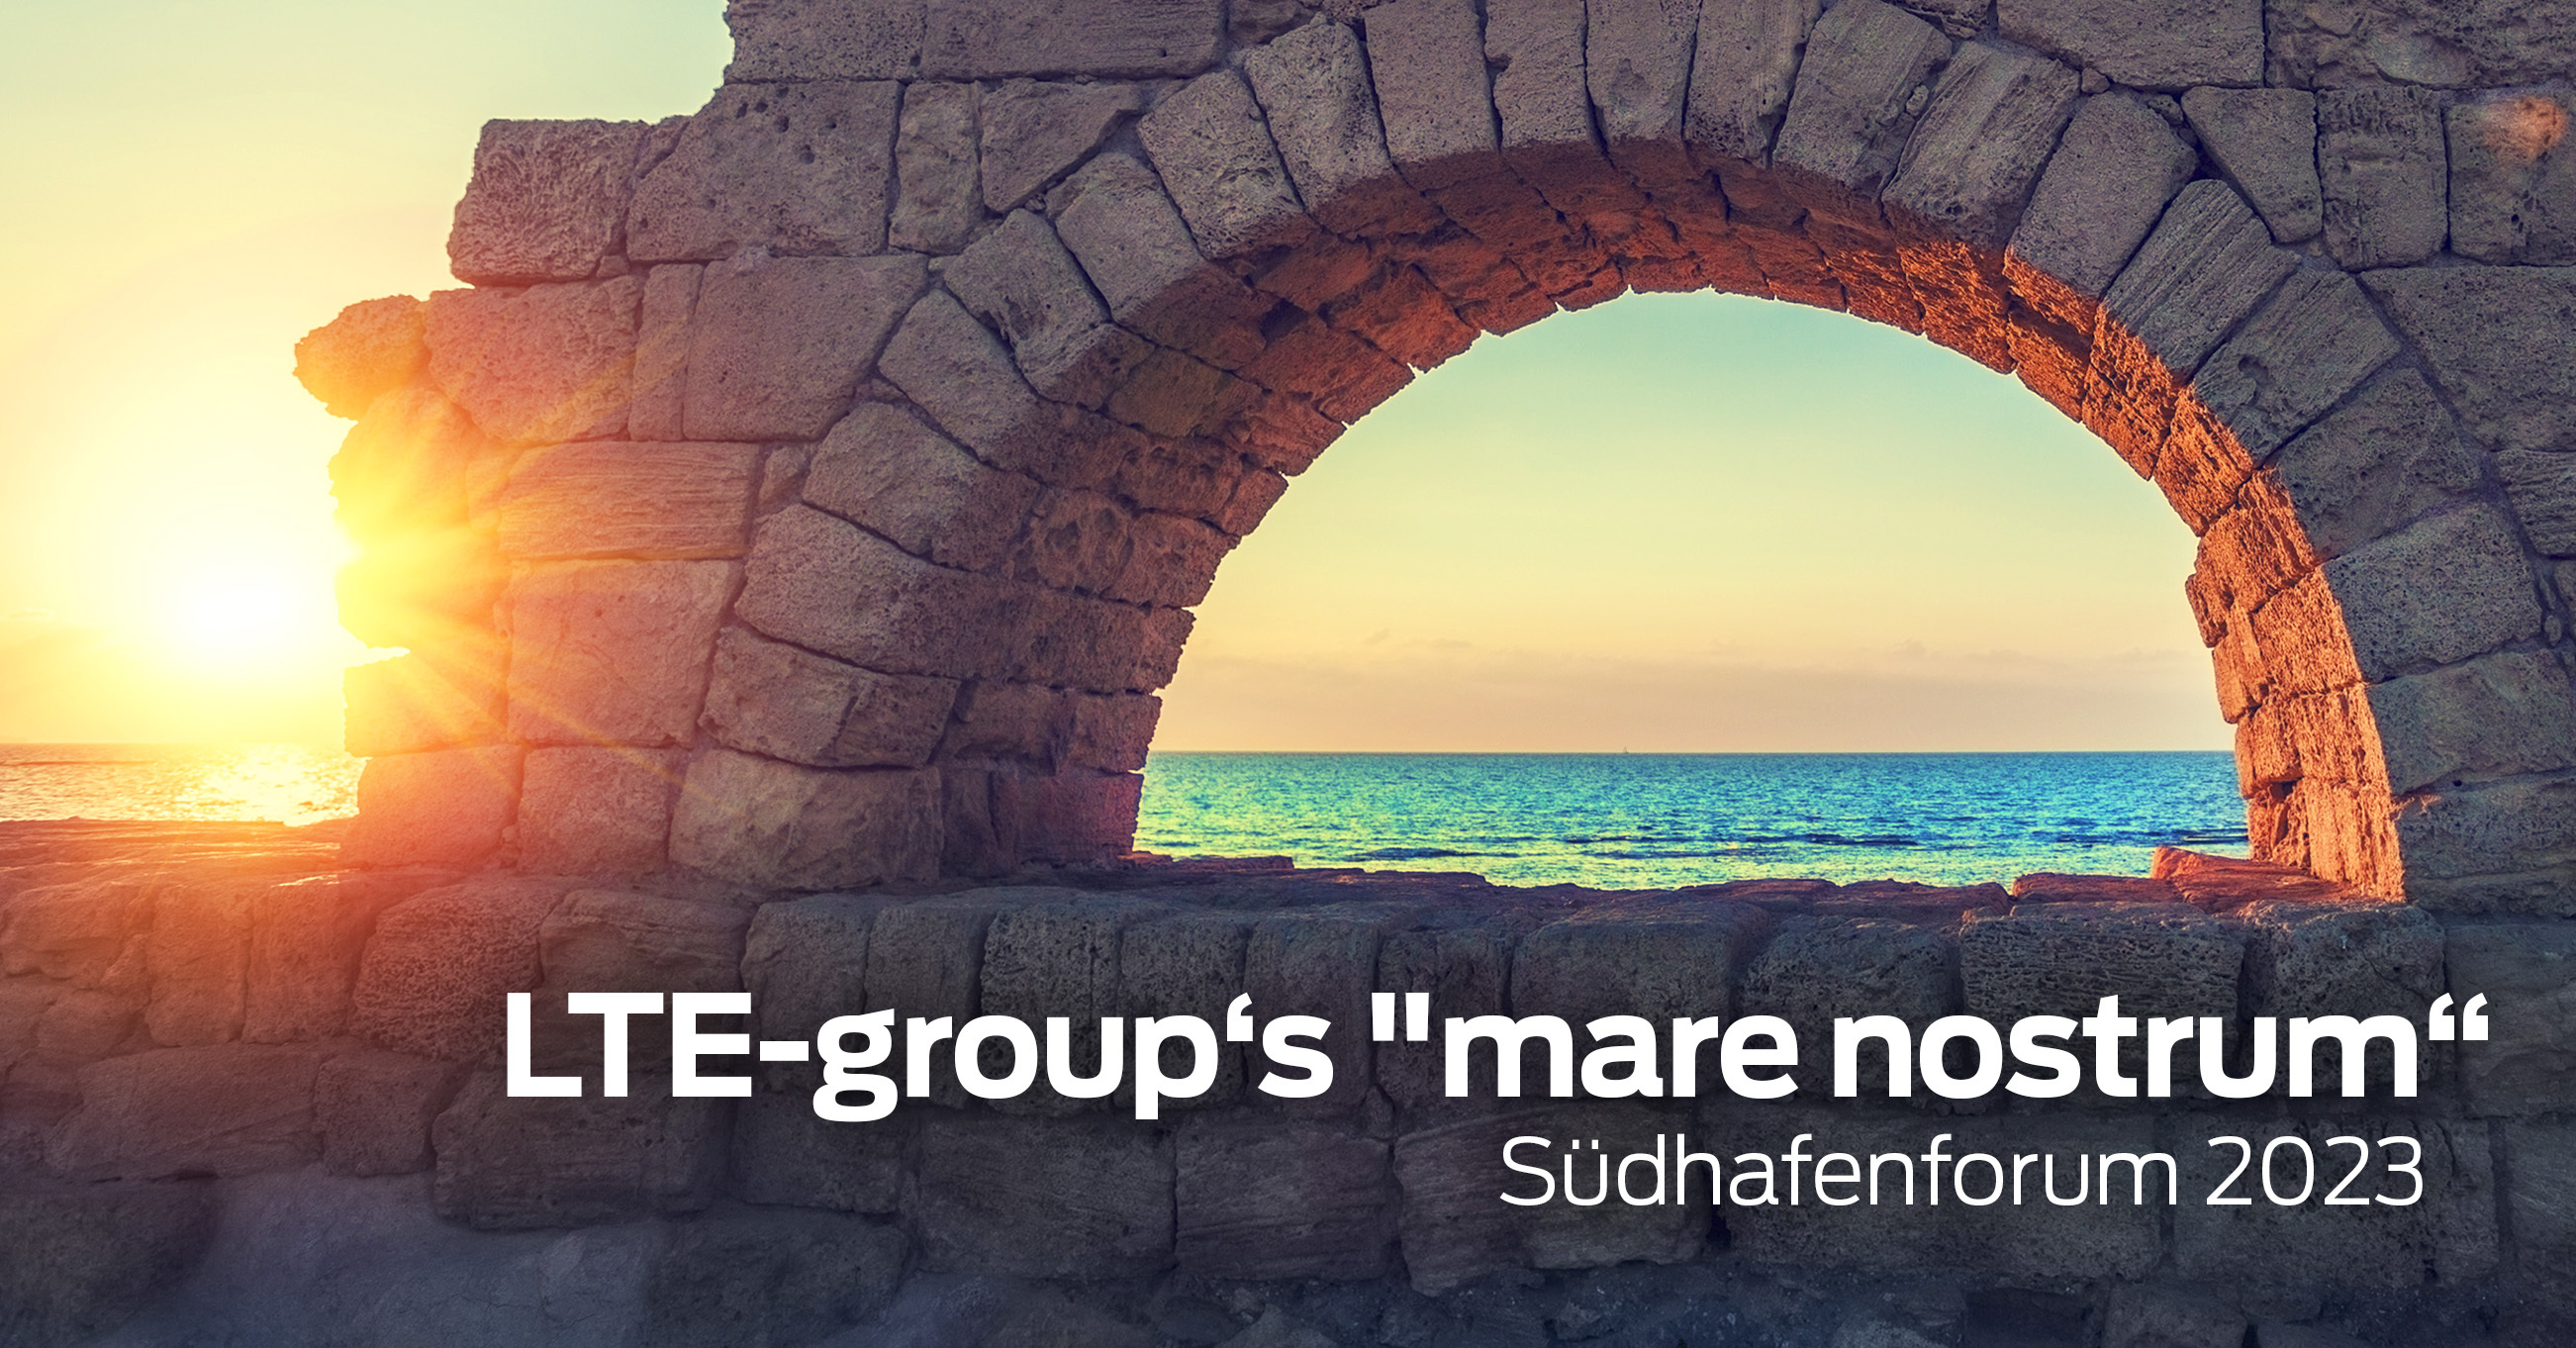 LTE-group‘s 'mare nostrum' and its harbours